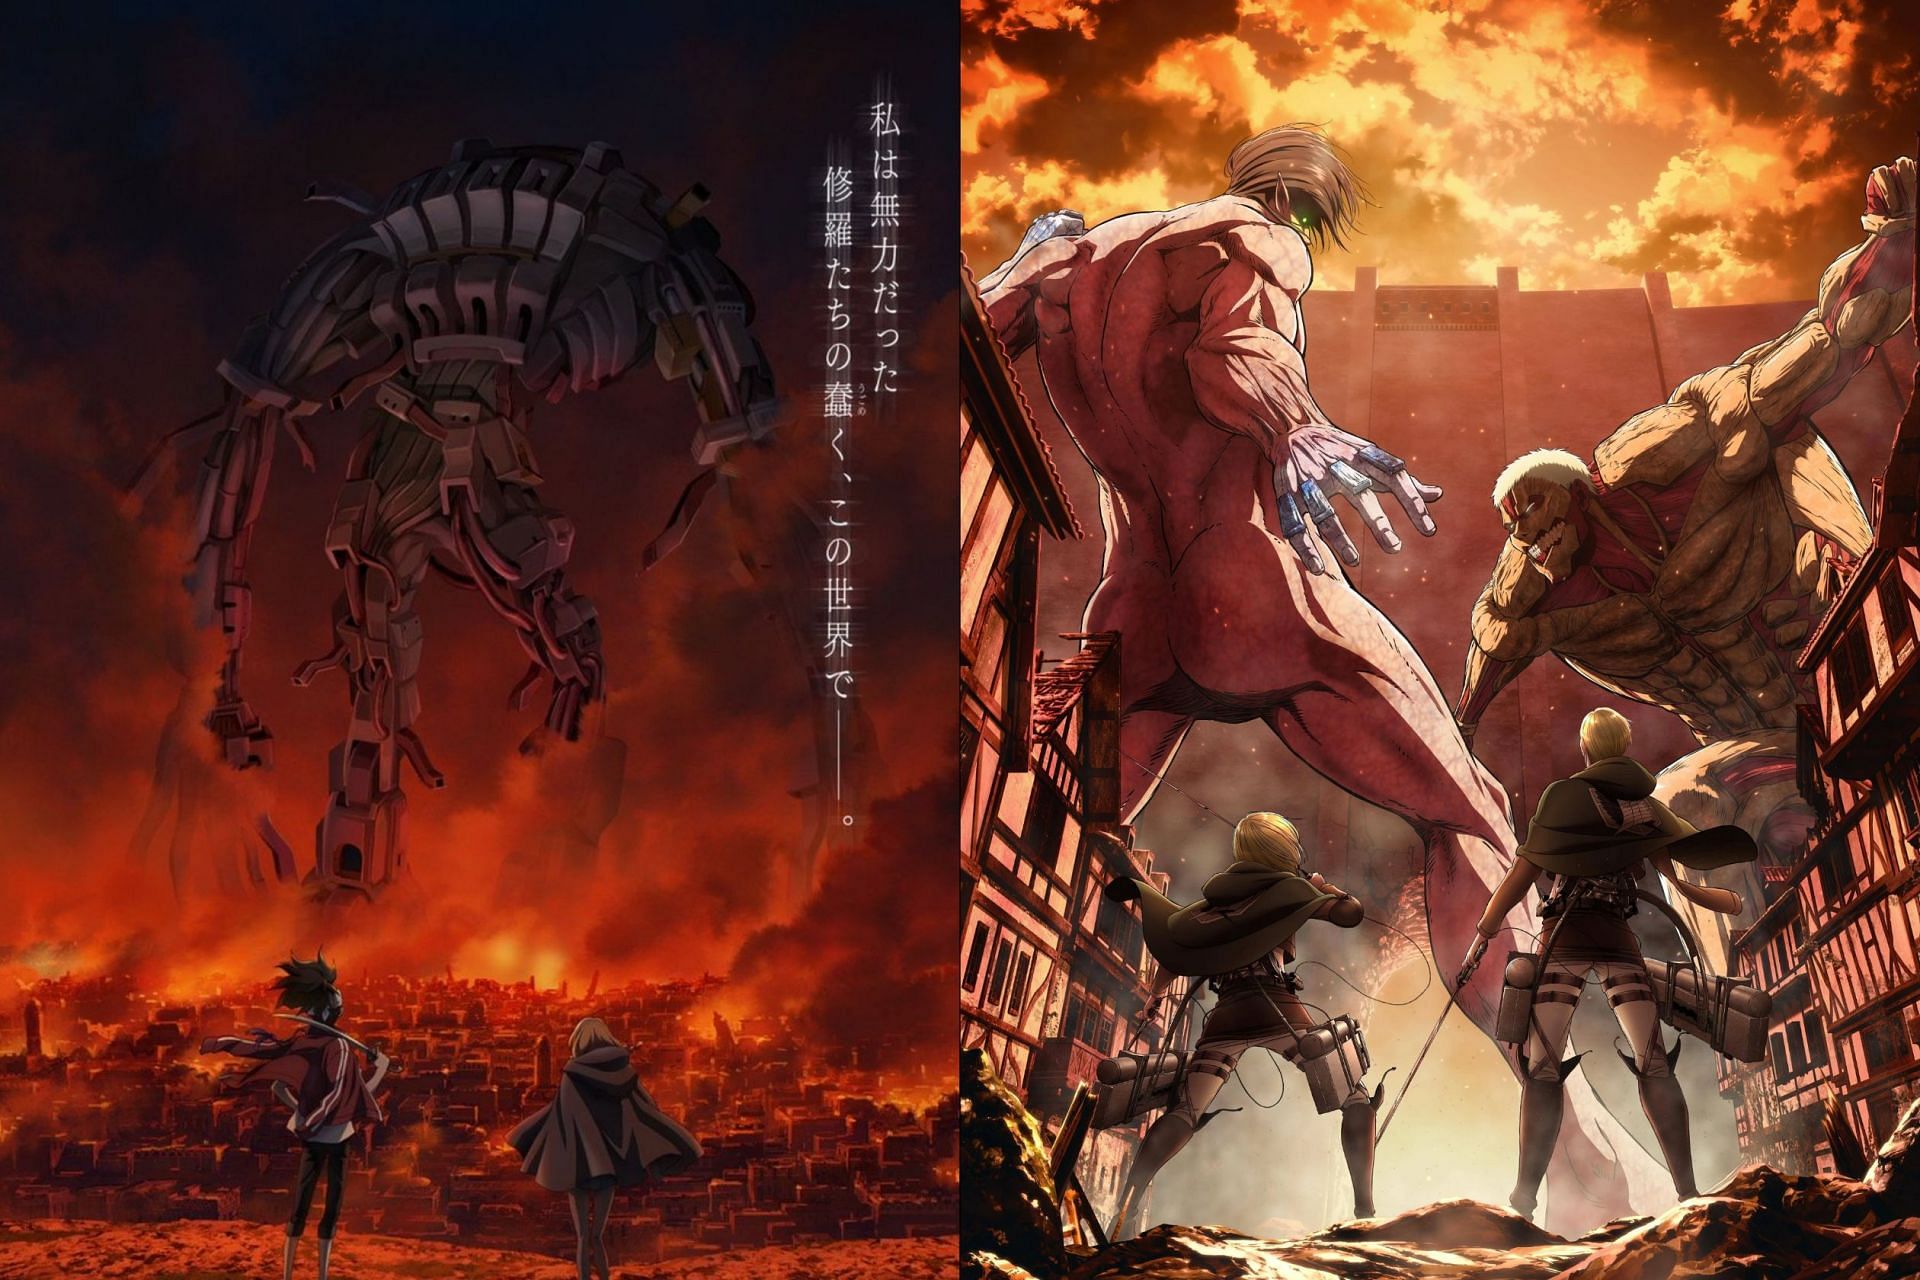 Love Attack On Titan? Watch Similar Anime Series On Netflix, Crunchyroll  And More